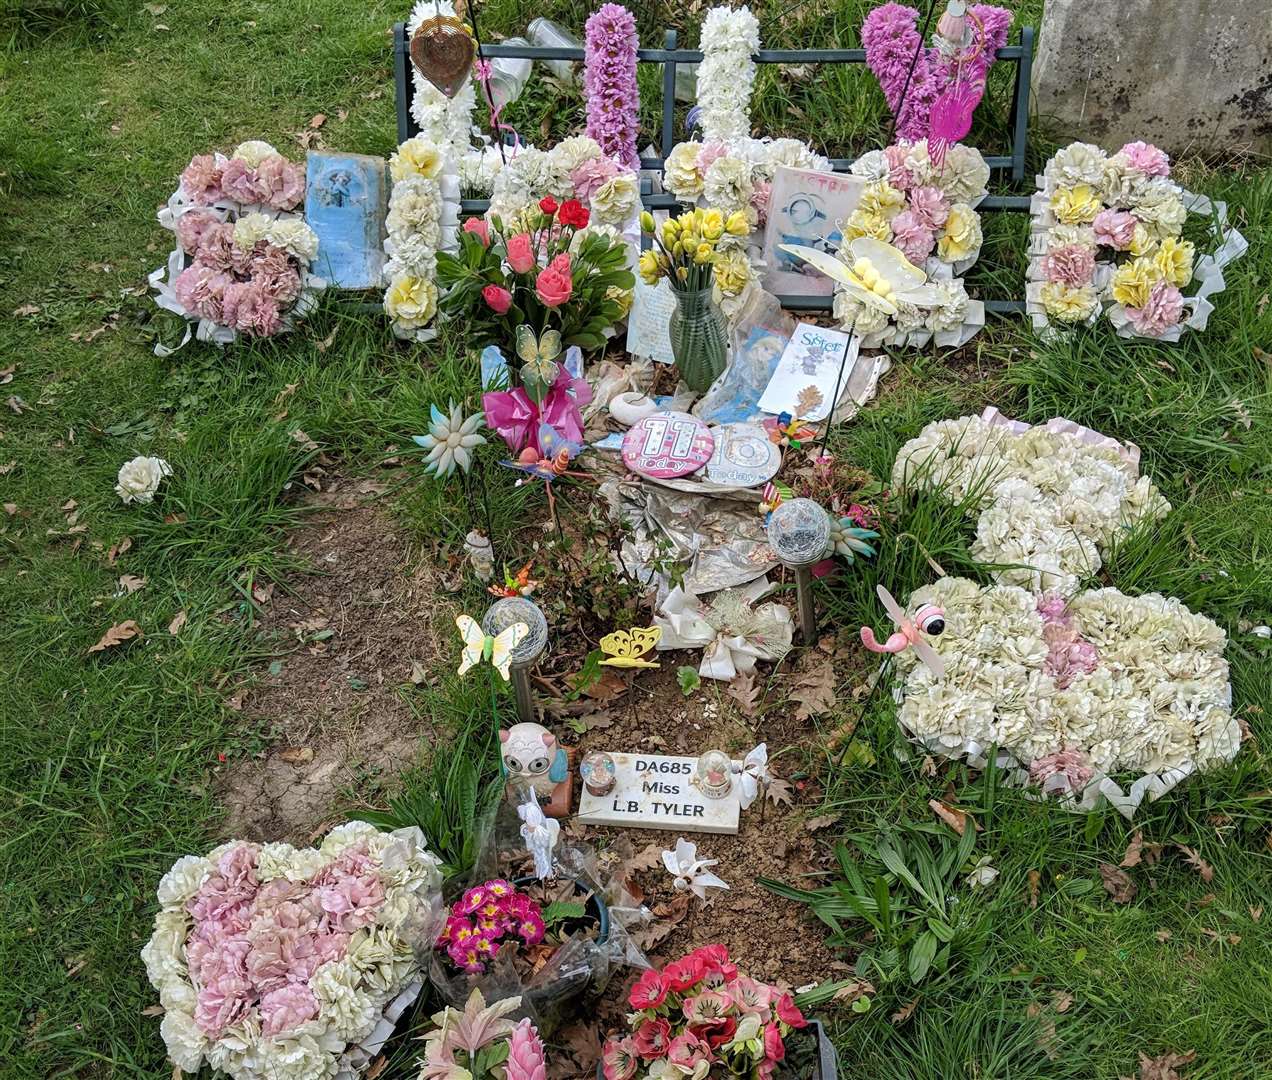 Lily Tyler's grave